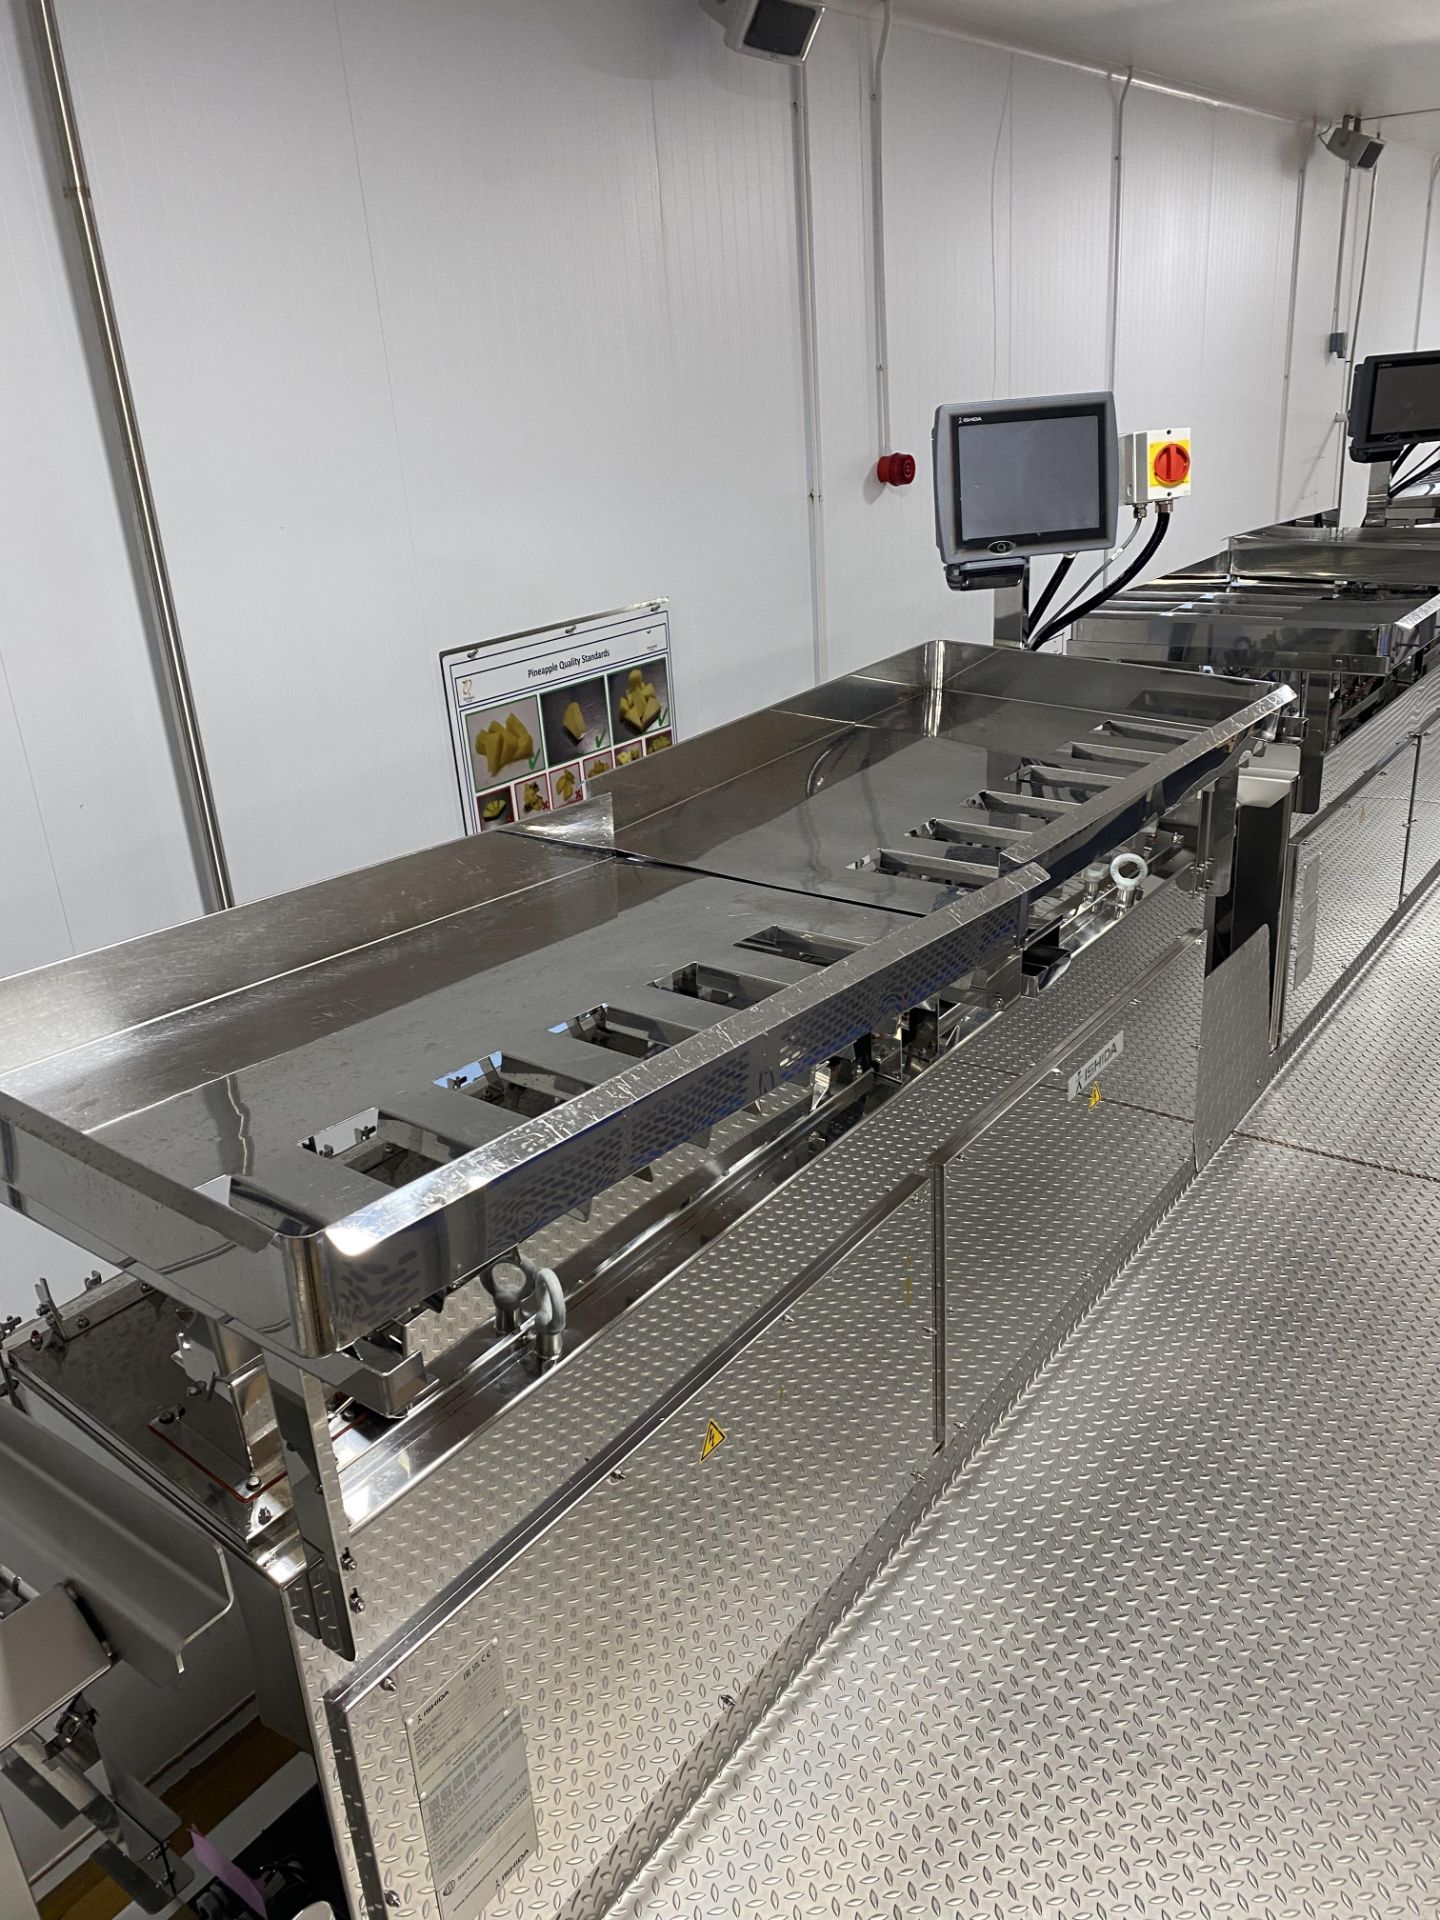 Ishida High speed 12 Head fresh fruit weighing system including access platform, product tray - Image 6 of 10